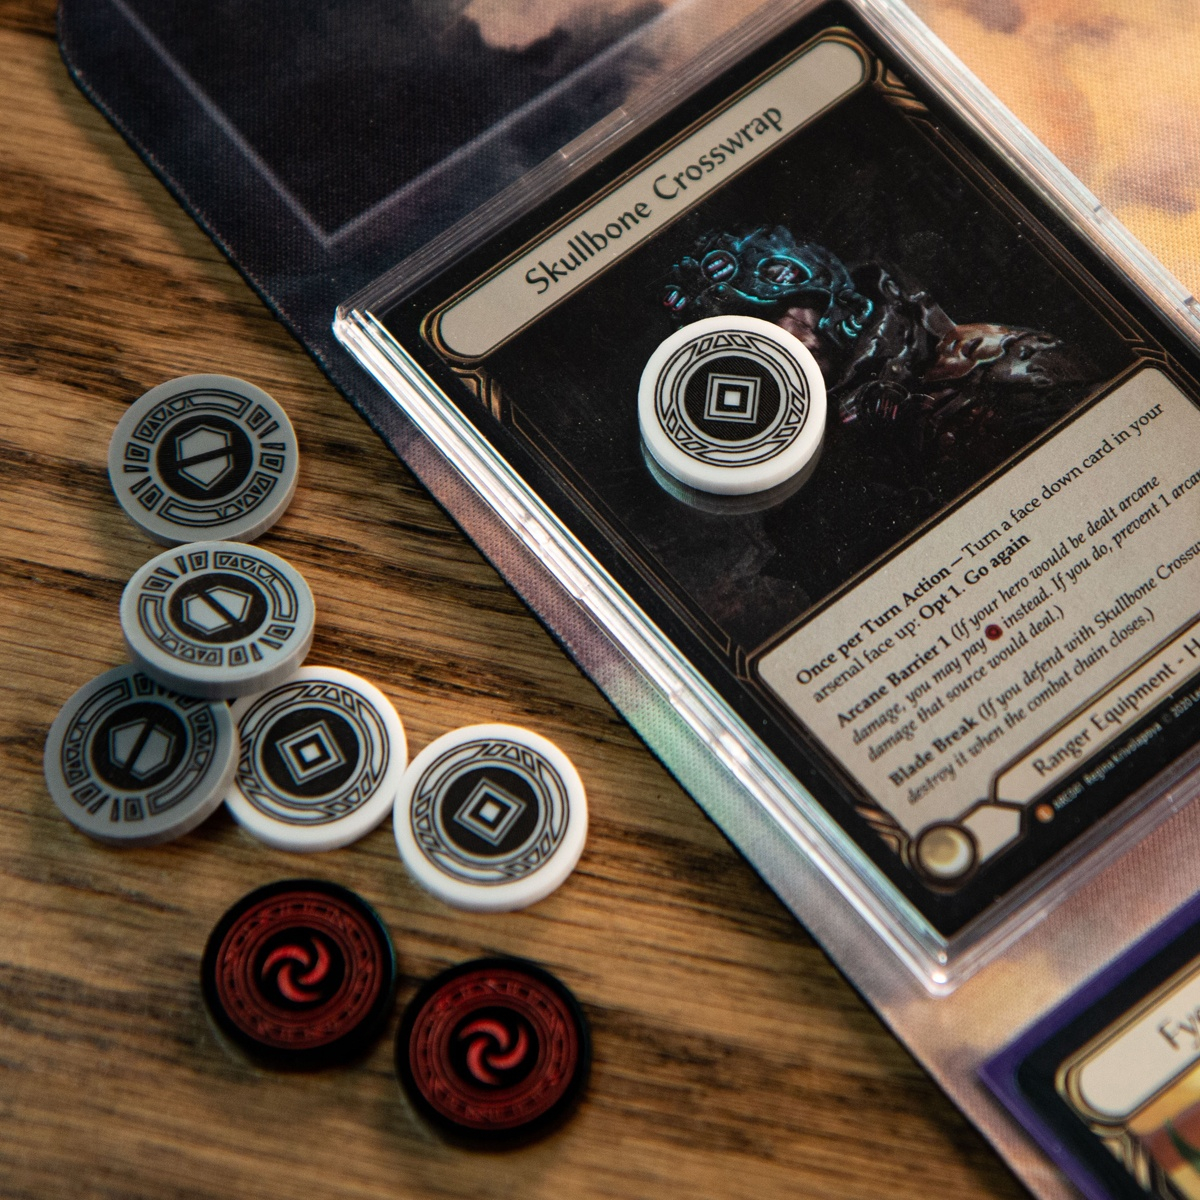 One Activation Token on top of the Flesh and Blood TCG card, Skullbone Crosswrap, to the left, Armor Tokens, additional Activation Tokens, and Resource Tokens wait to be used